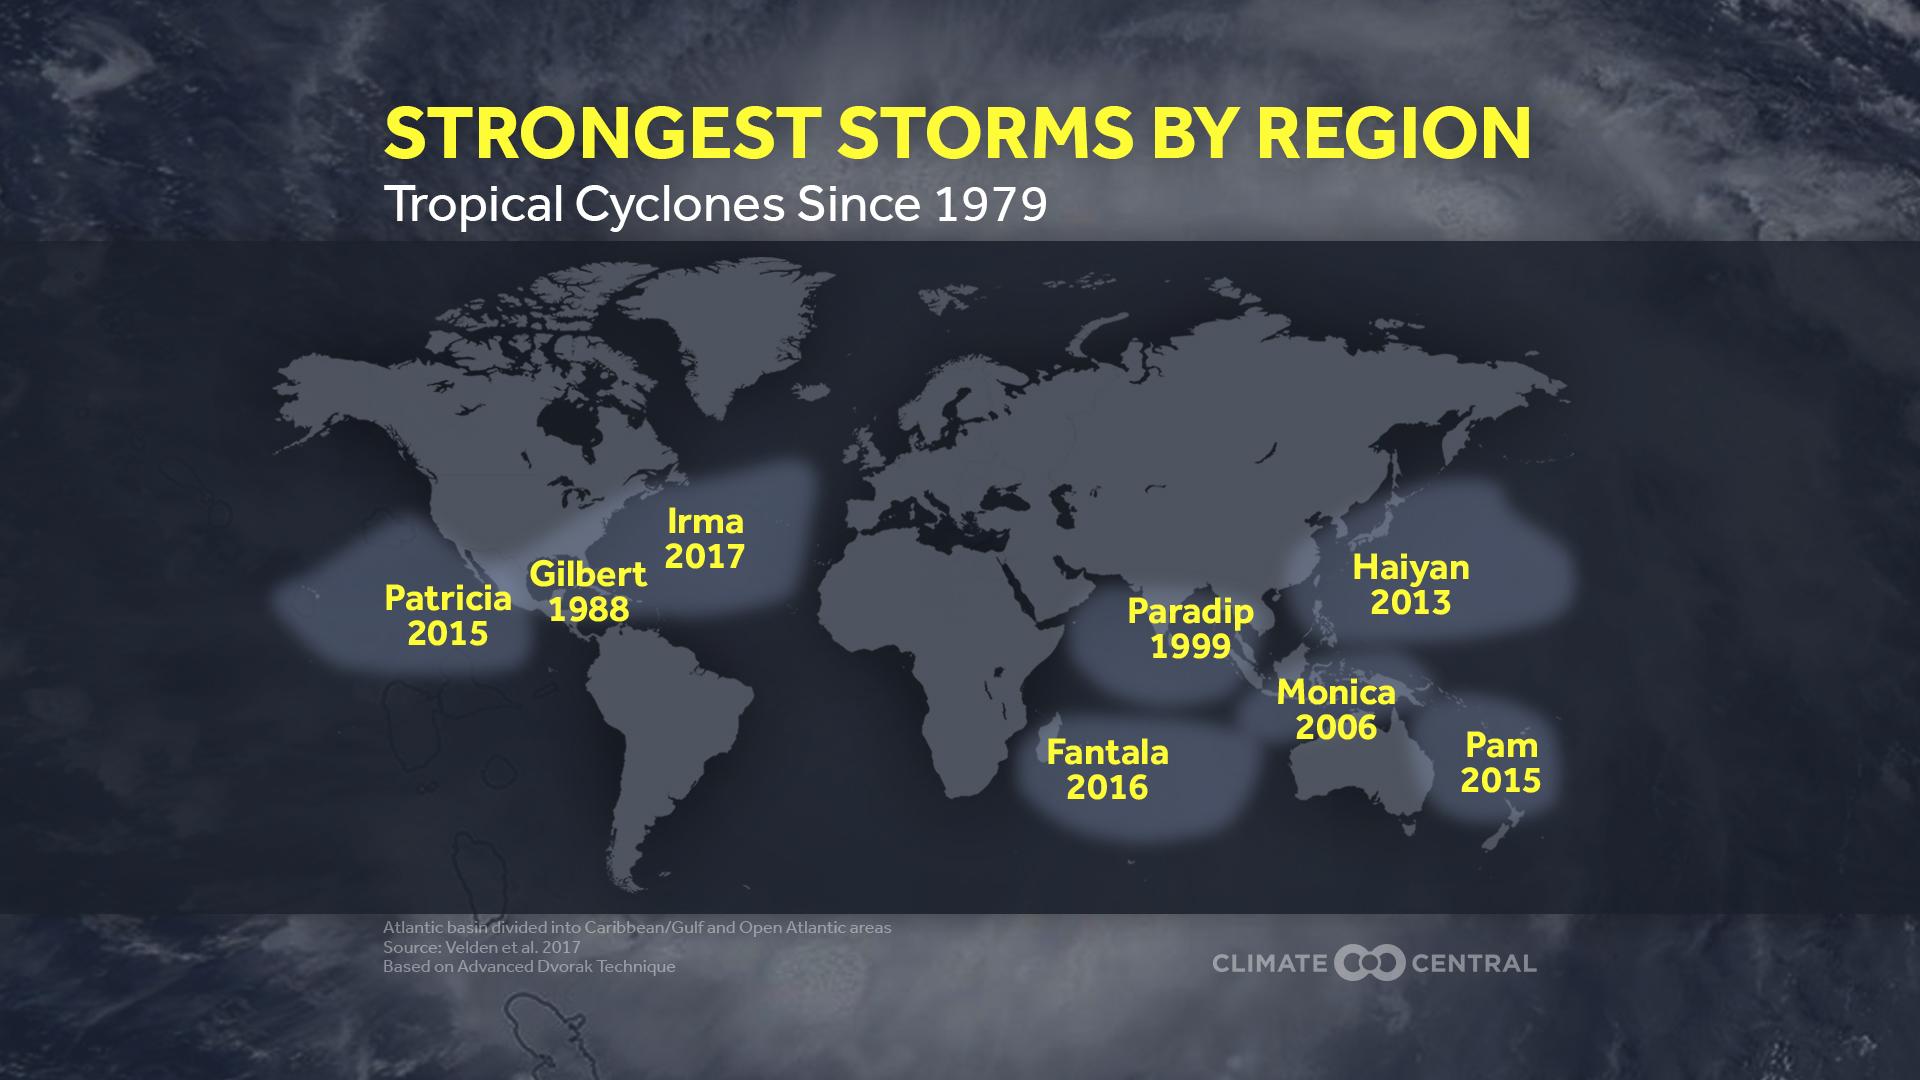 Tropical Cyclone Records & Rainfall Extremes